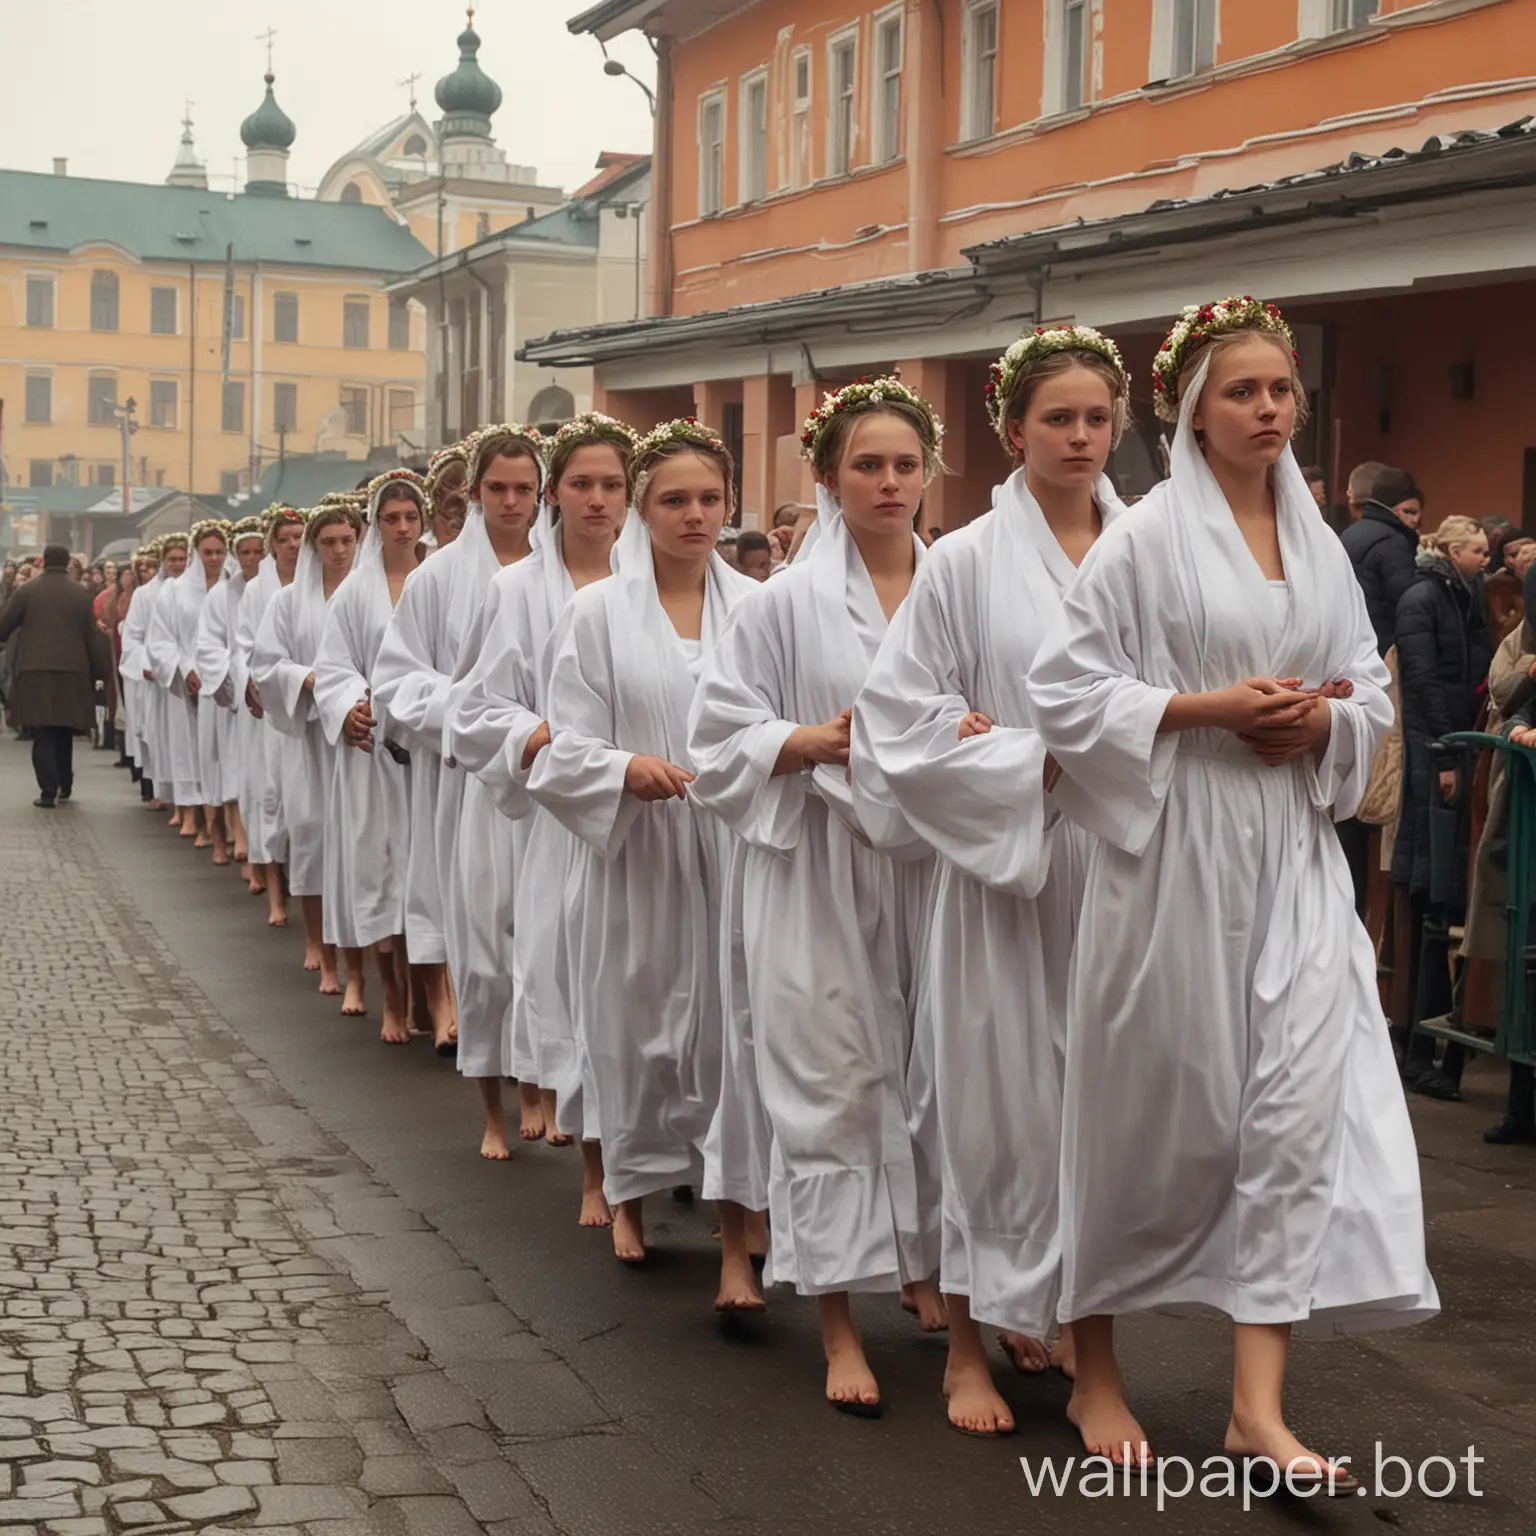 Youthful-Gathering-at-Russian-Bathhouse-Traditional-Ritual-of-Young-People